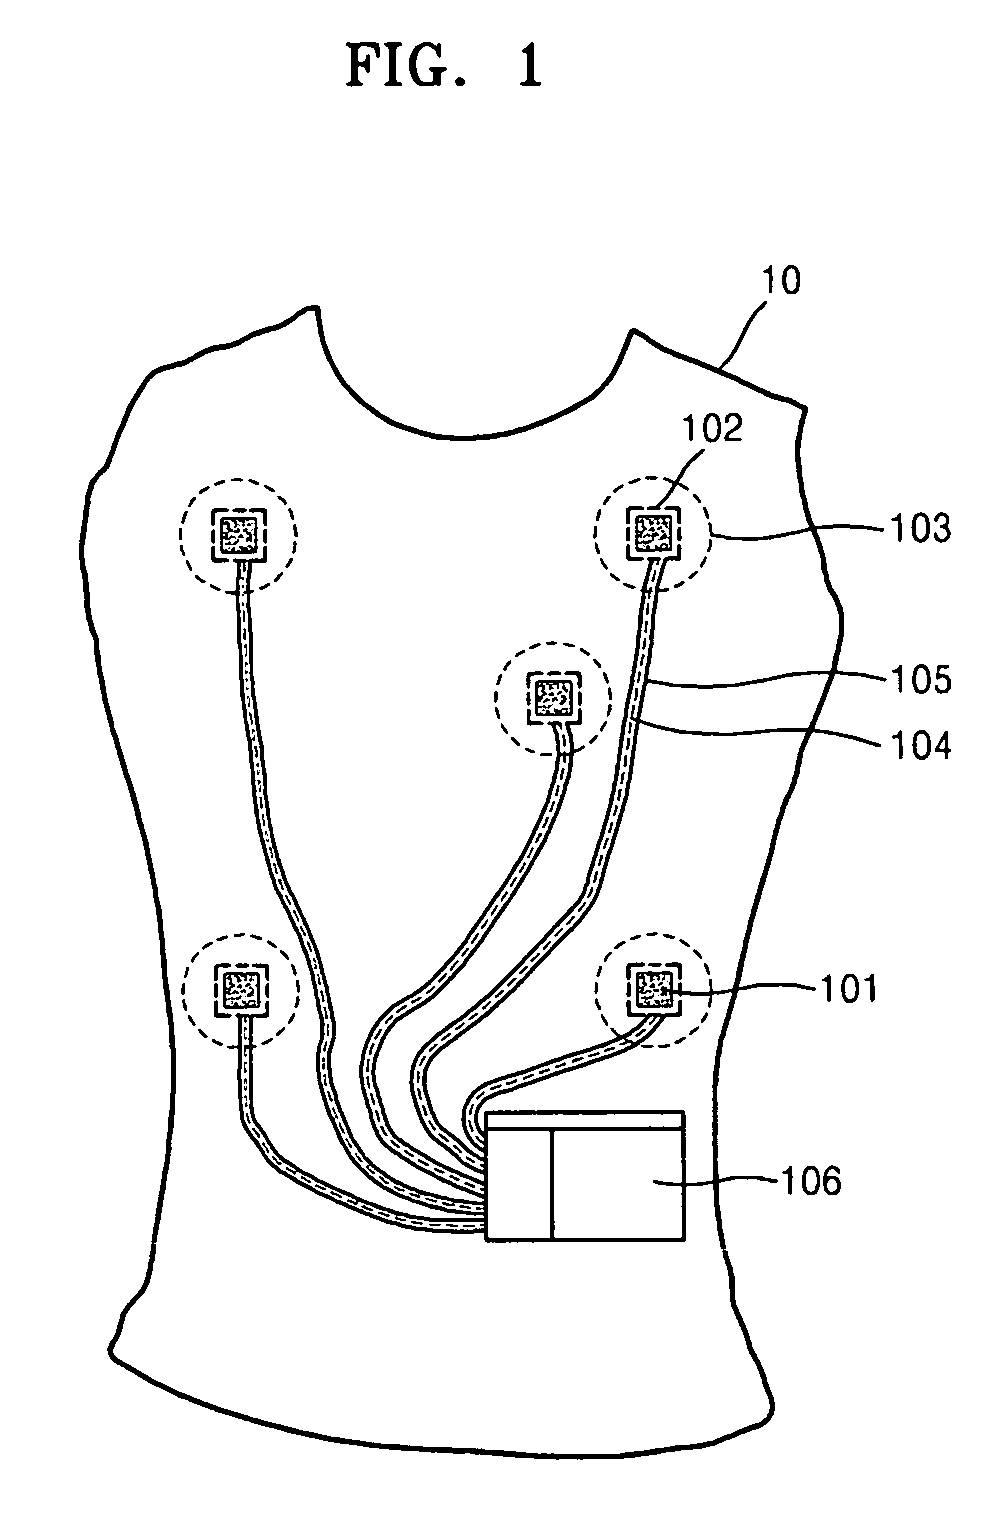 Garment for measuring physiological signal